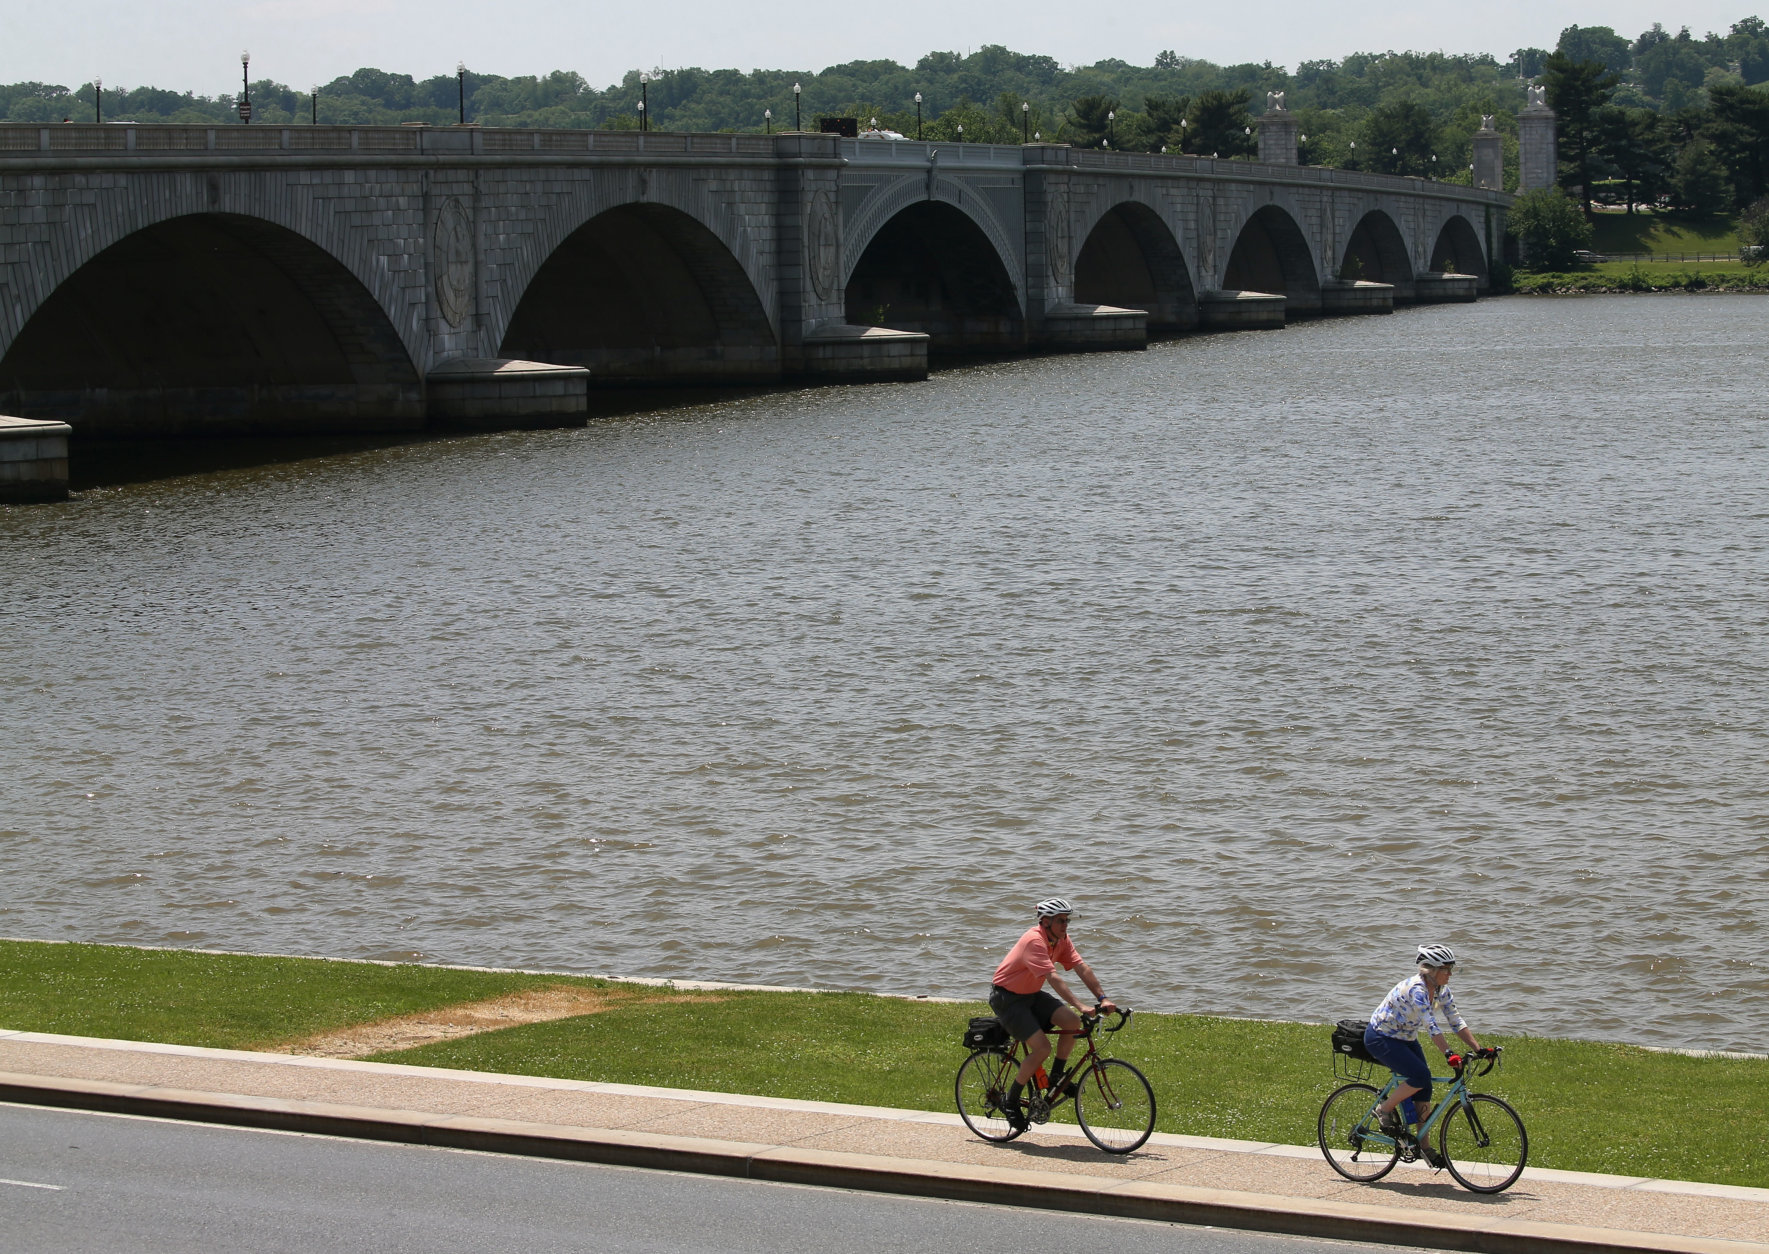 WASHINGTON, DC - MAY 20:  People ride bicycles along the Potomac River near the Memorial Bridge May 20, 2015 in Washington, DC. A recent study released by the American College of Sports Medicine ranked Washington as the fittest city in the United States.  (Photo by Mark Wilson/Getty Images)